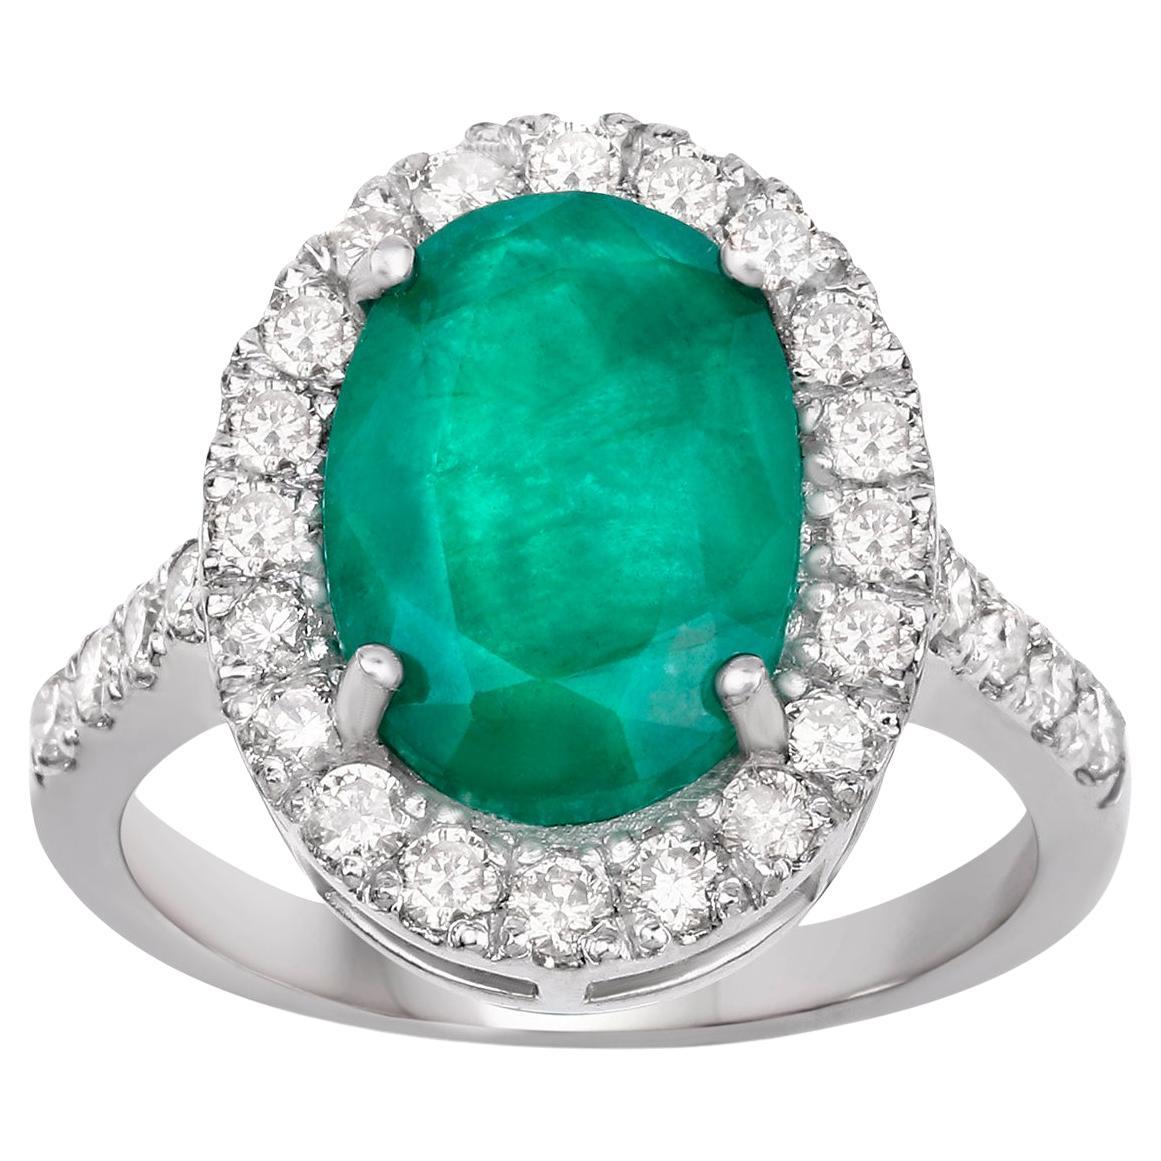 Emerald Ring With Diamonds 5.49 Carats Rhodium Plated Sterling Silver